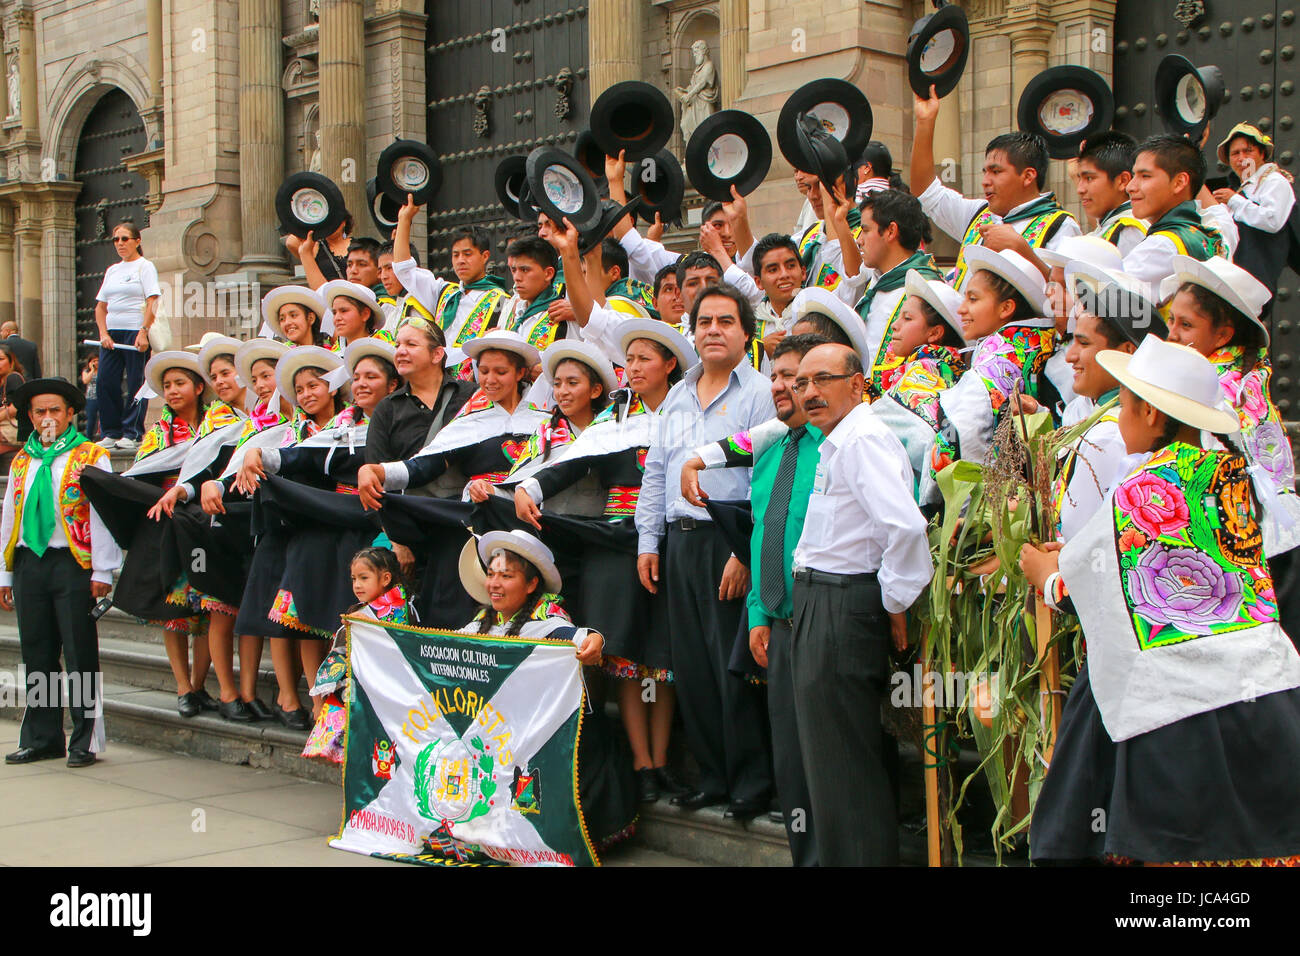 Group of dancers posing during Festival of the Virgin de la Candelaria in Lima, Peru. The core of the festival is dancing and music performed by diffe Stock Photo